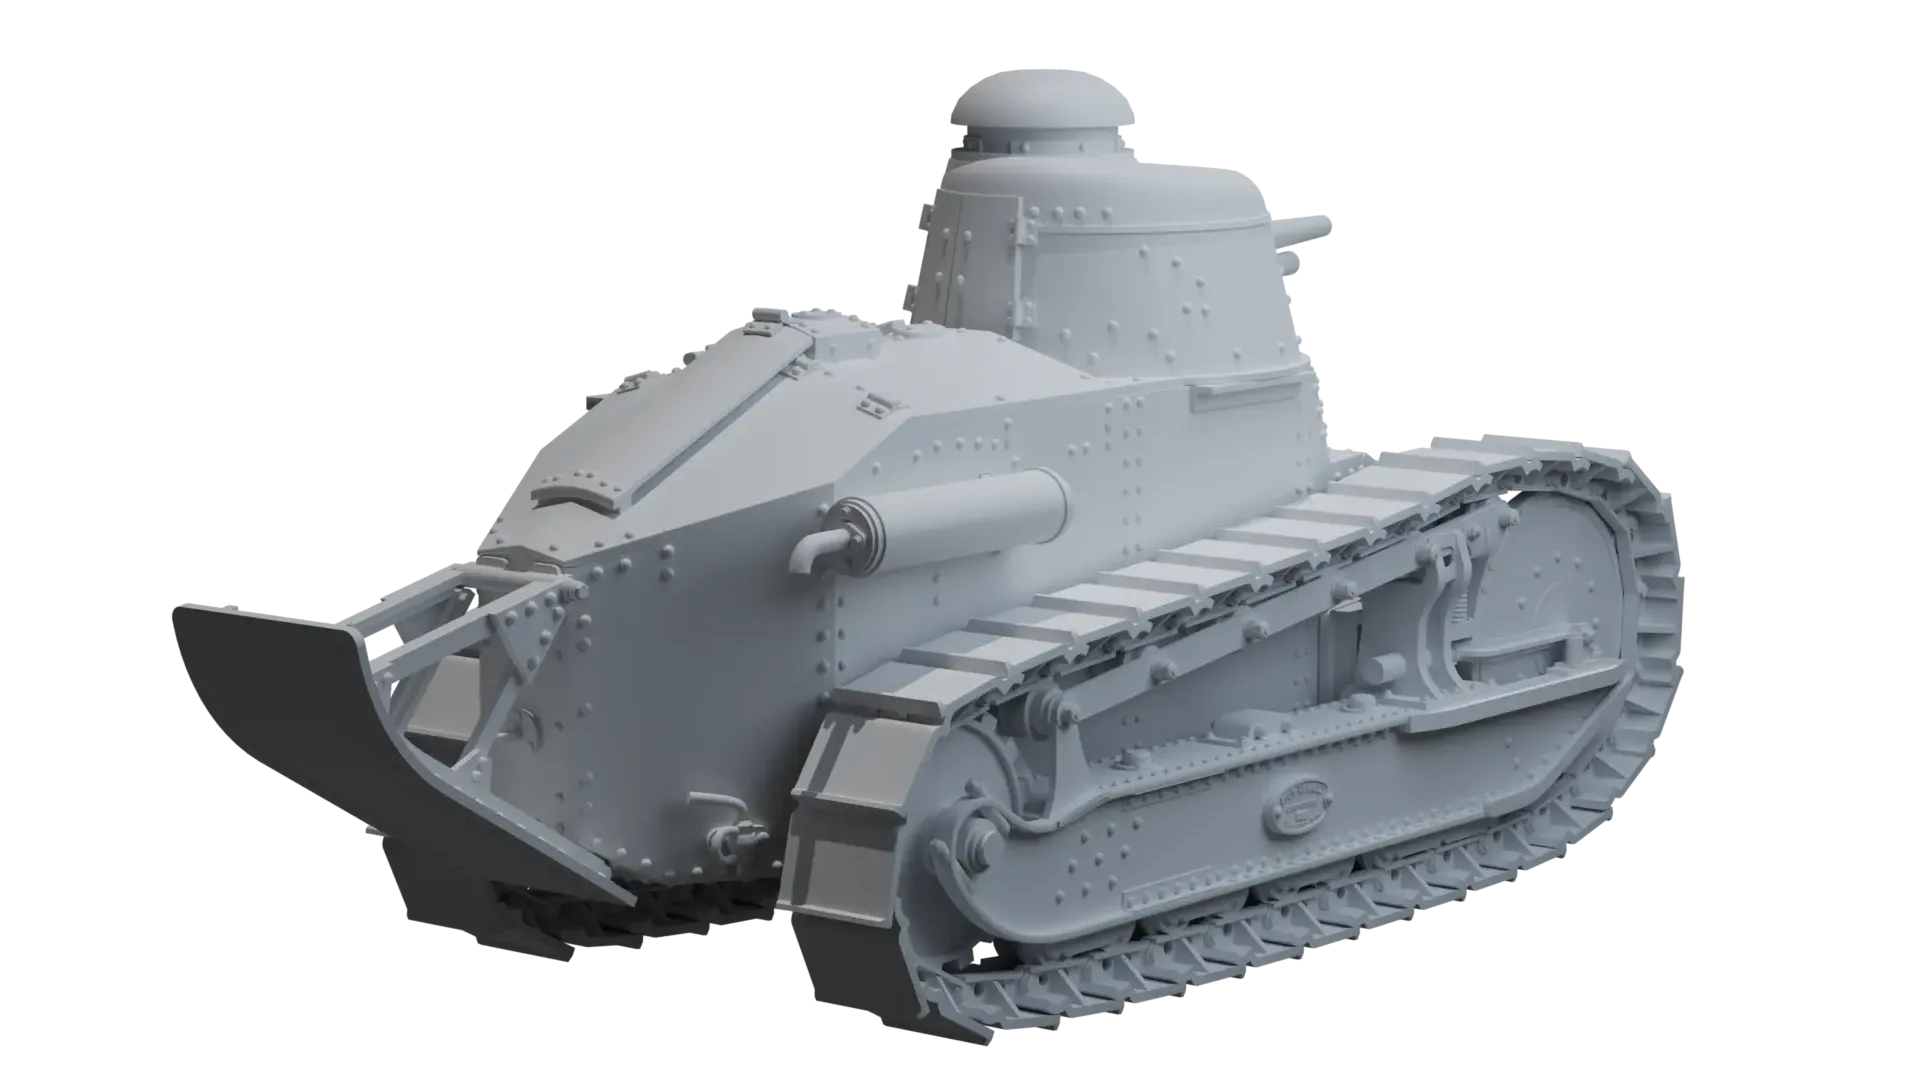 Renault FT17 Tank 28mm Scale